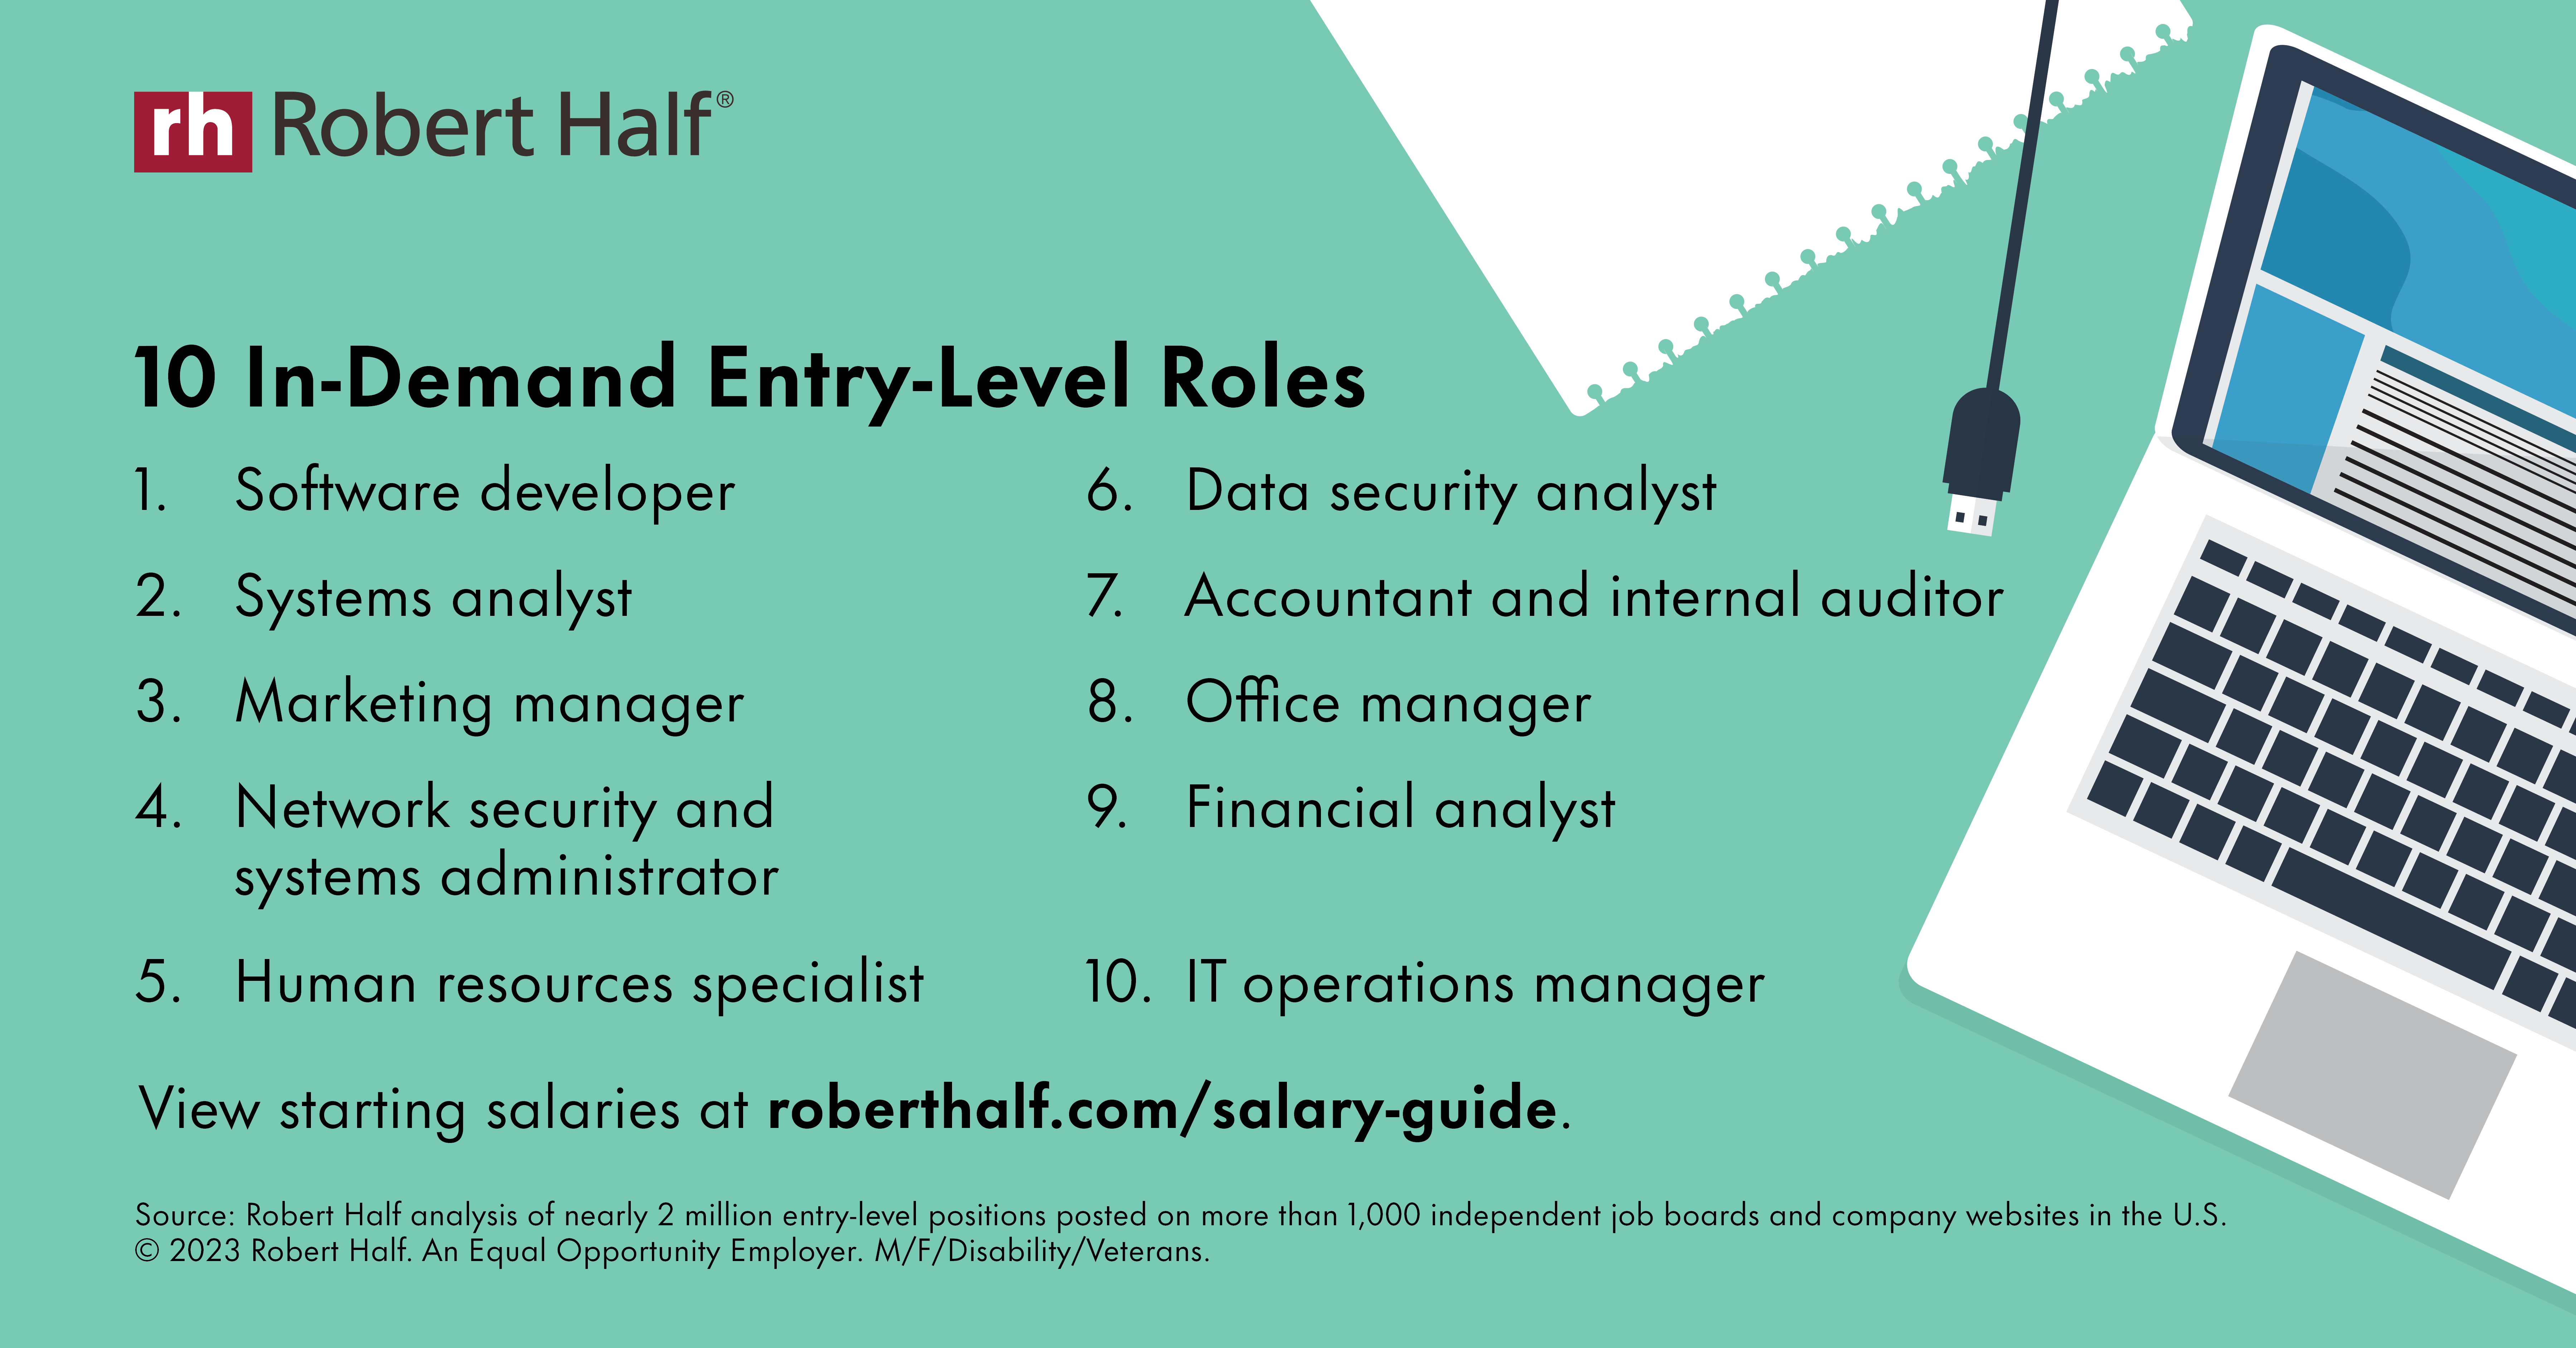 In-Demand Entry-Level Roles